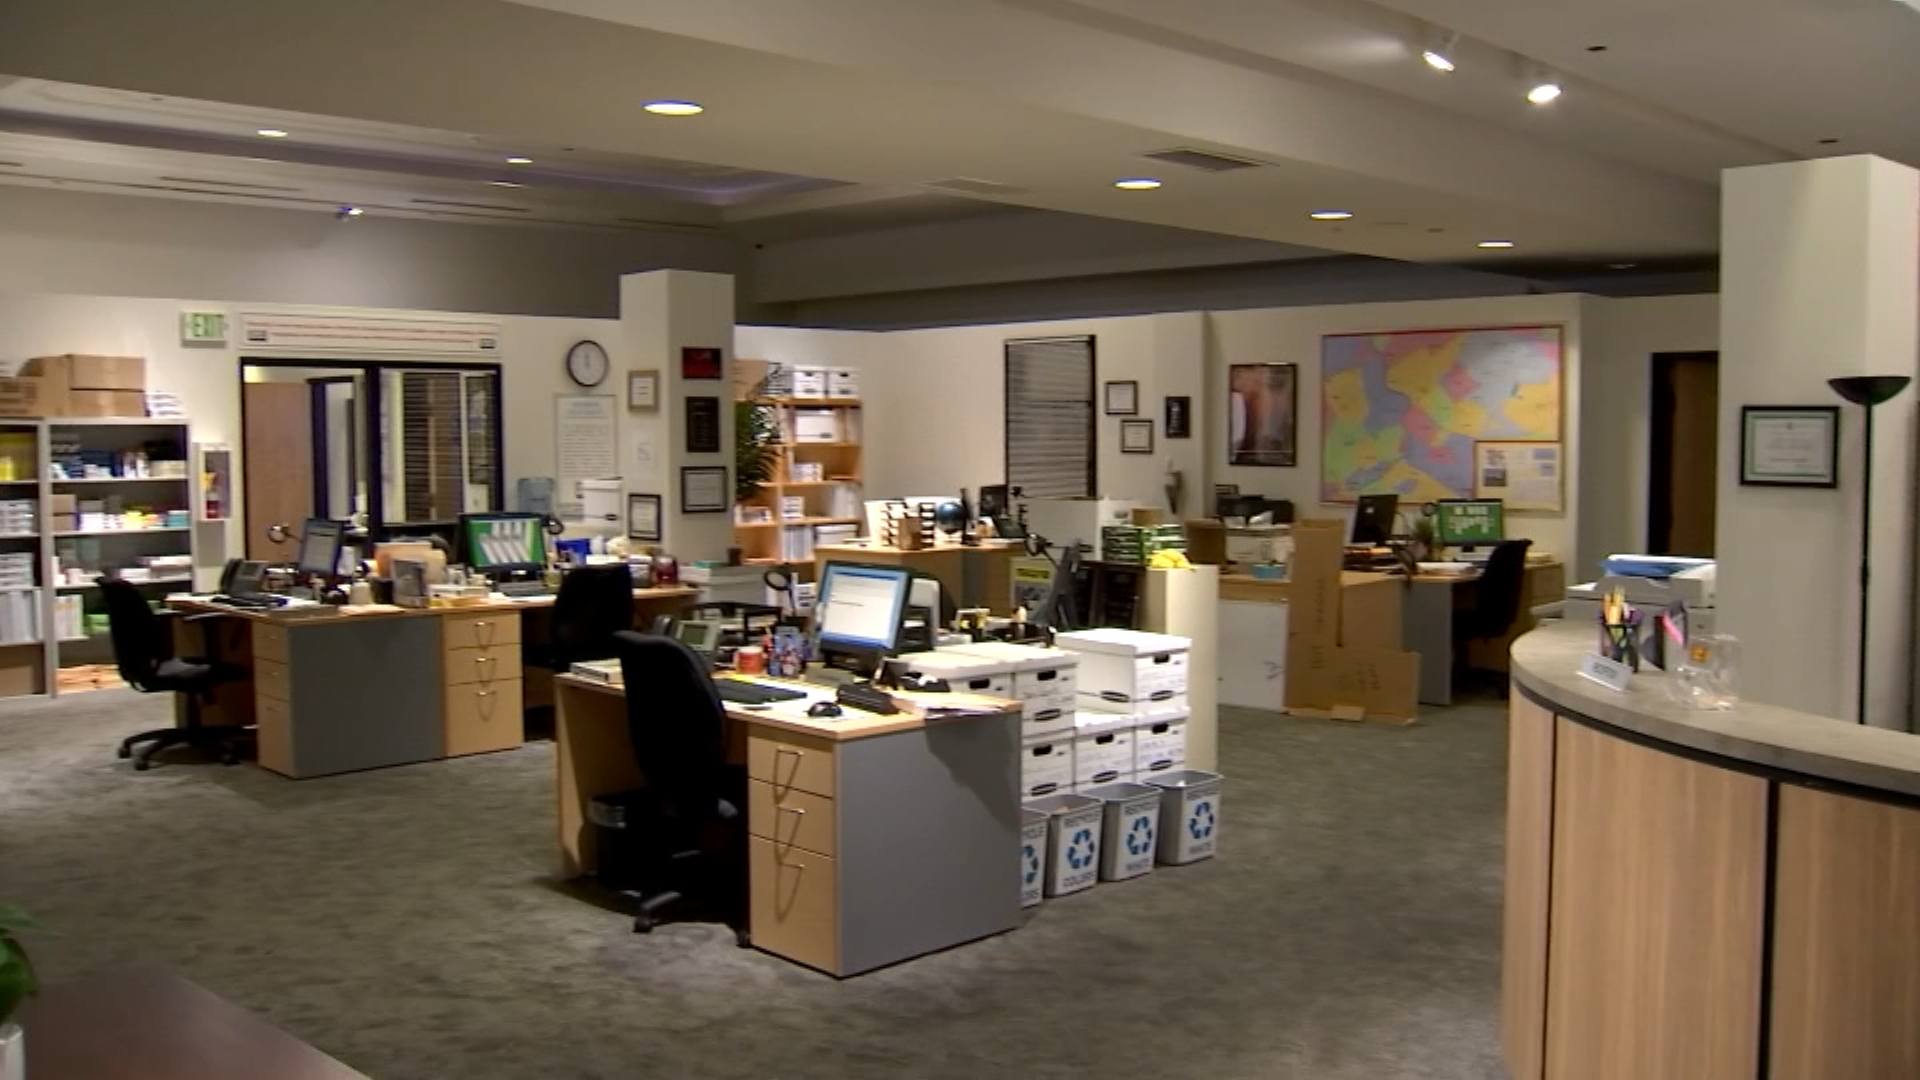 The Dunder Mifflin building from the 1st season of The Office